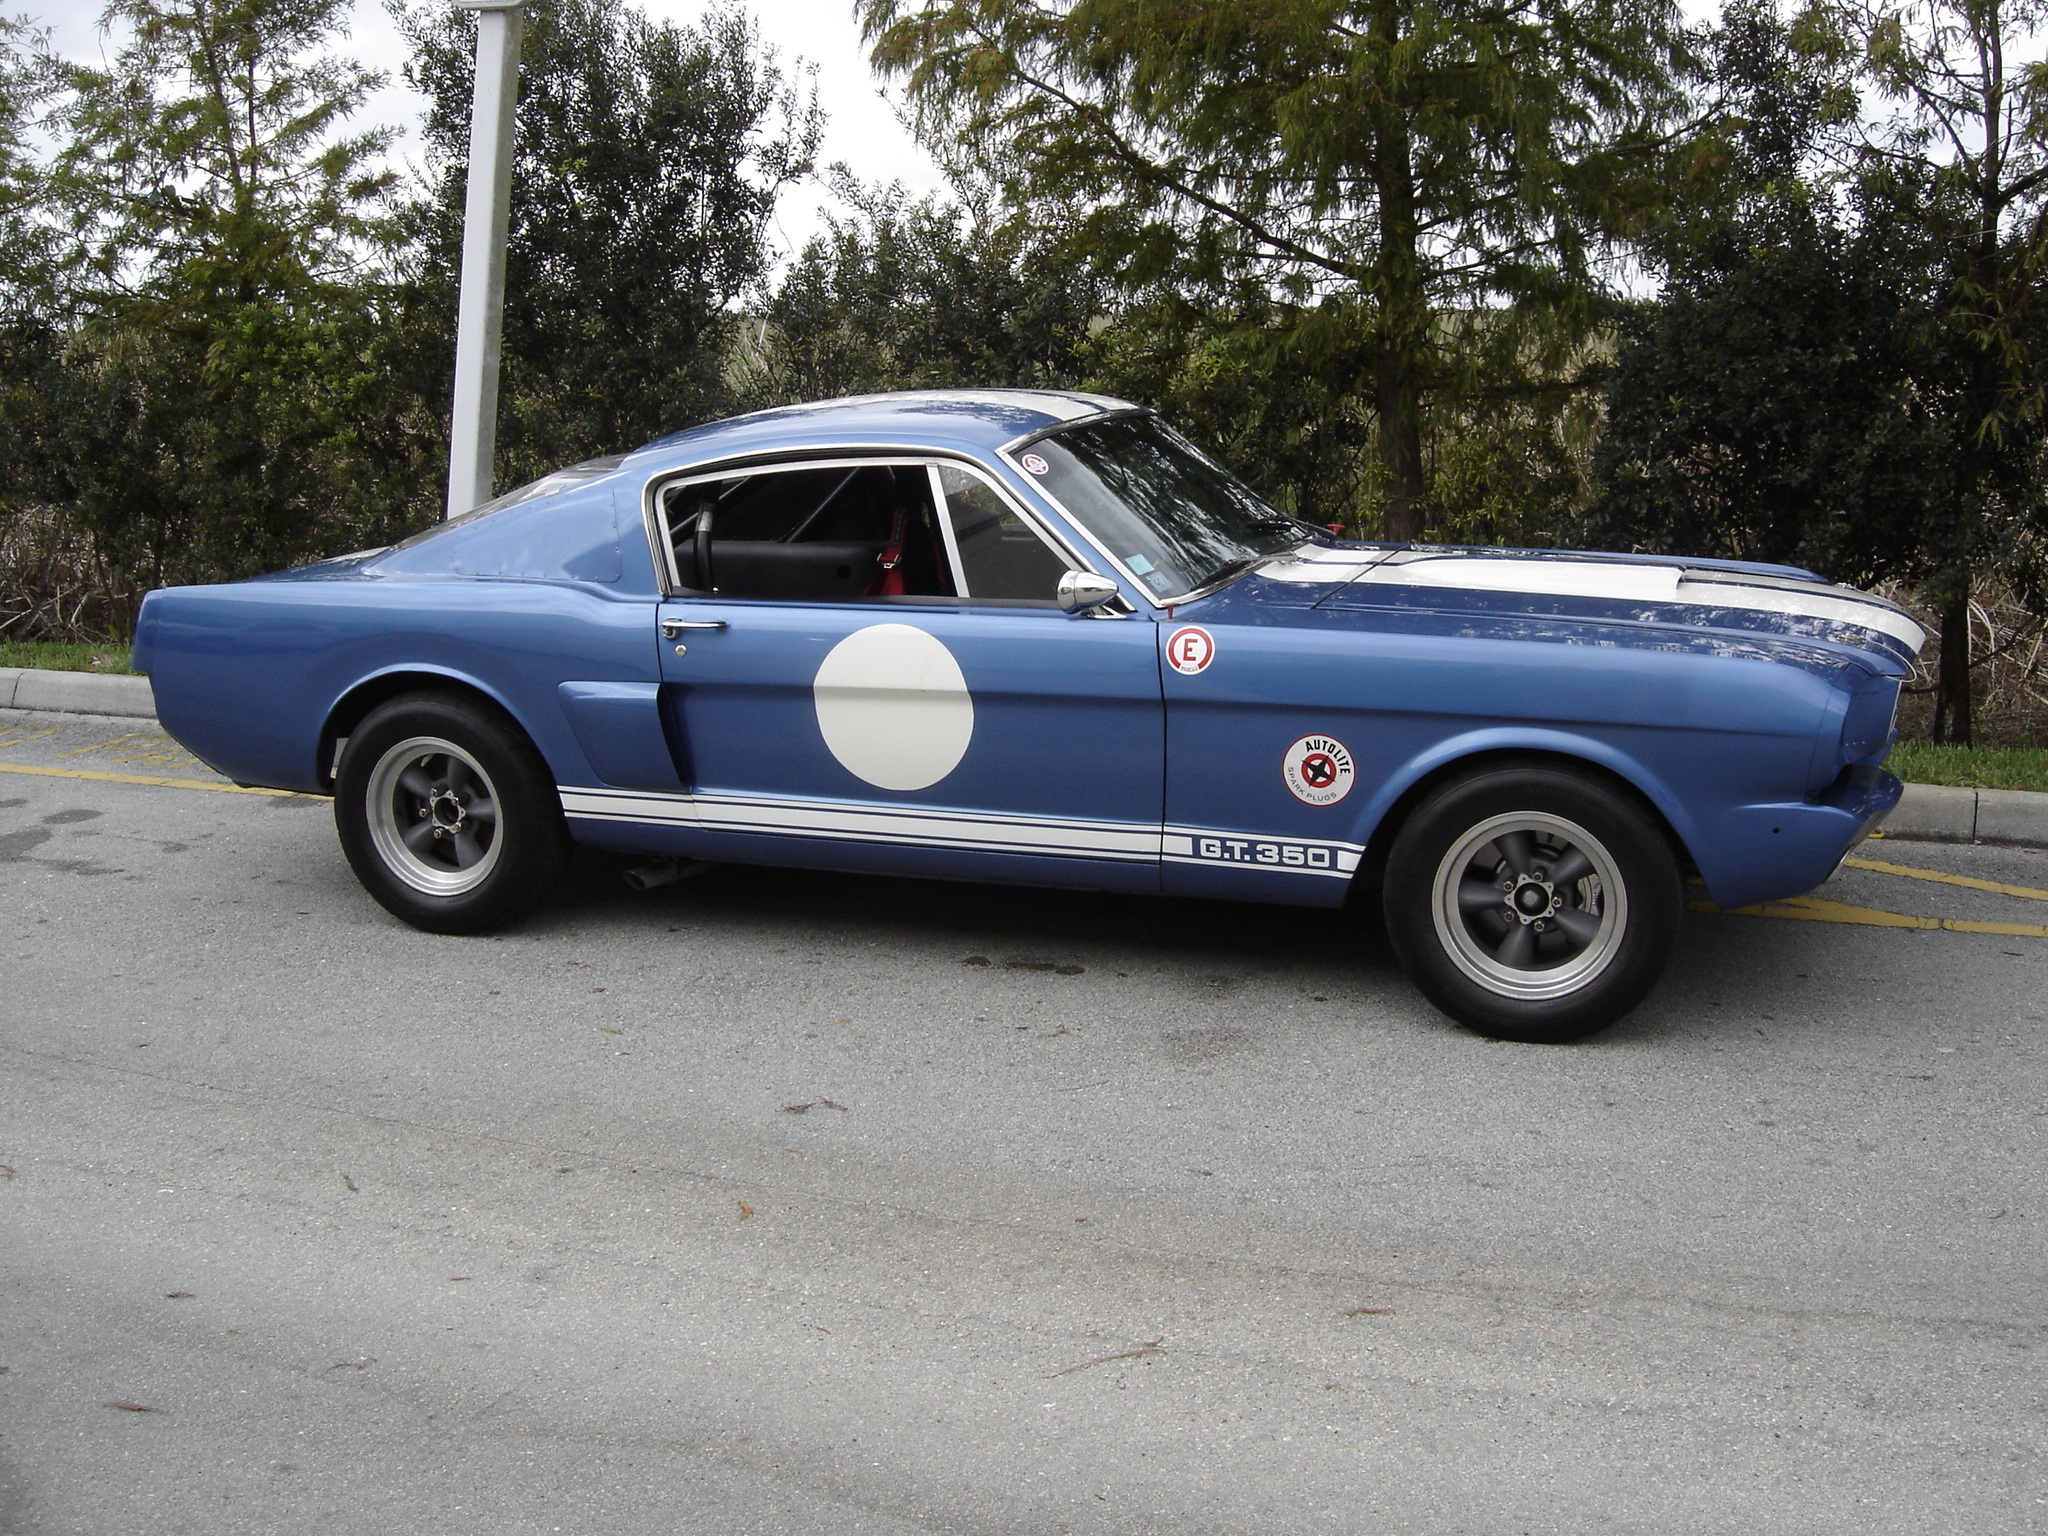  Wallpapers on Ford Mustang Shelby Gt350 Fastback 1965 1966 Gt 350 500 Hd Wallpaper